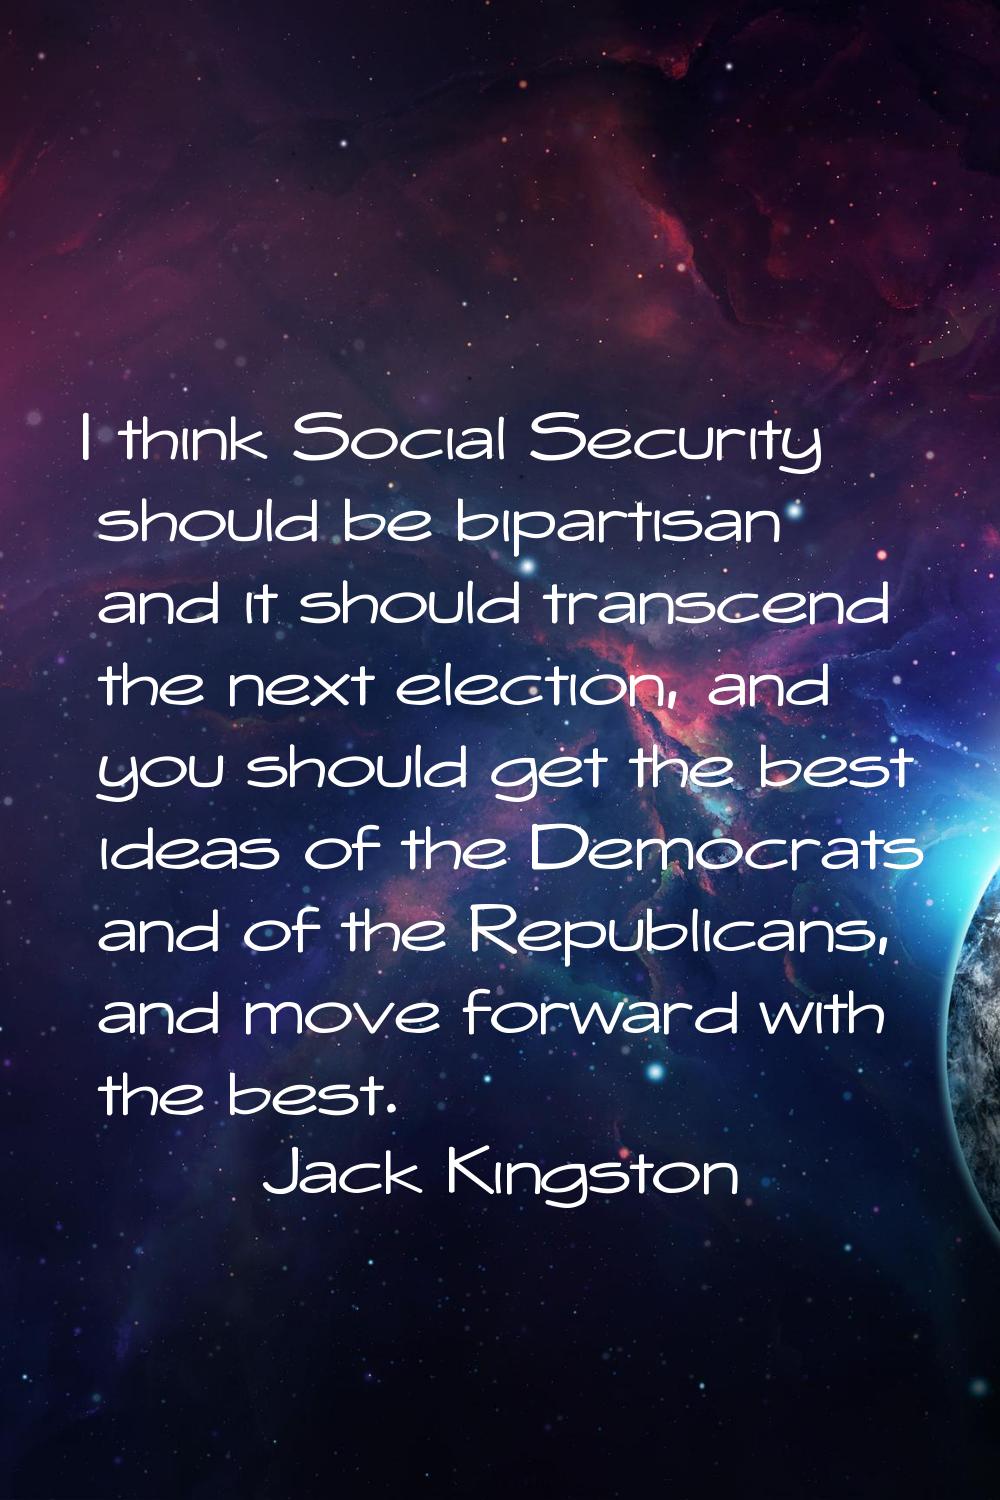 I think Social Security should be bipartisan and it should transcend the next election, and you sho